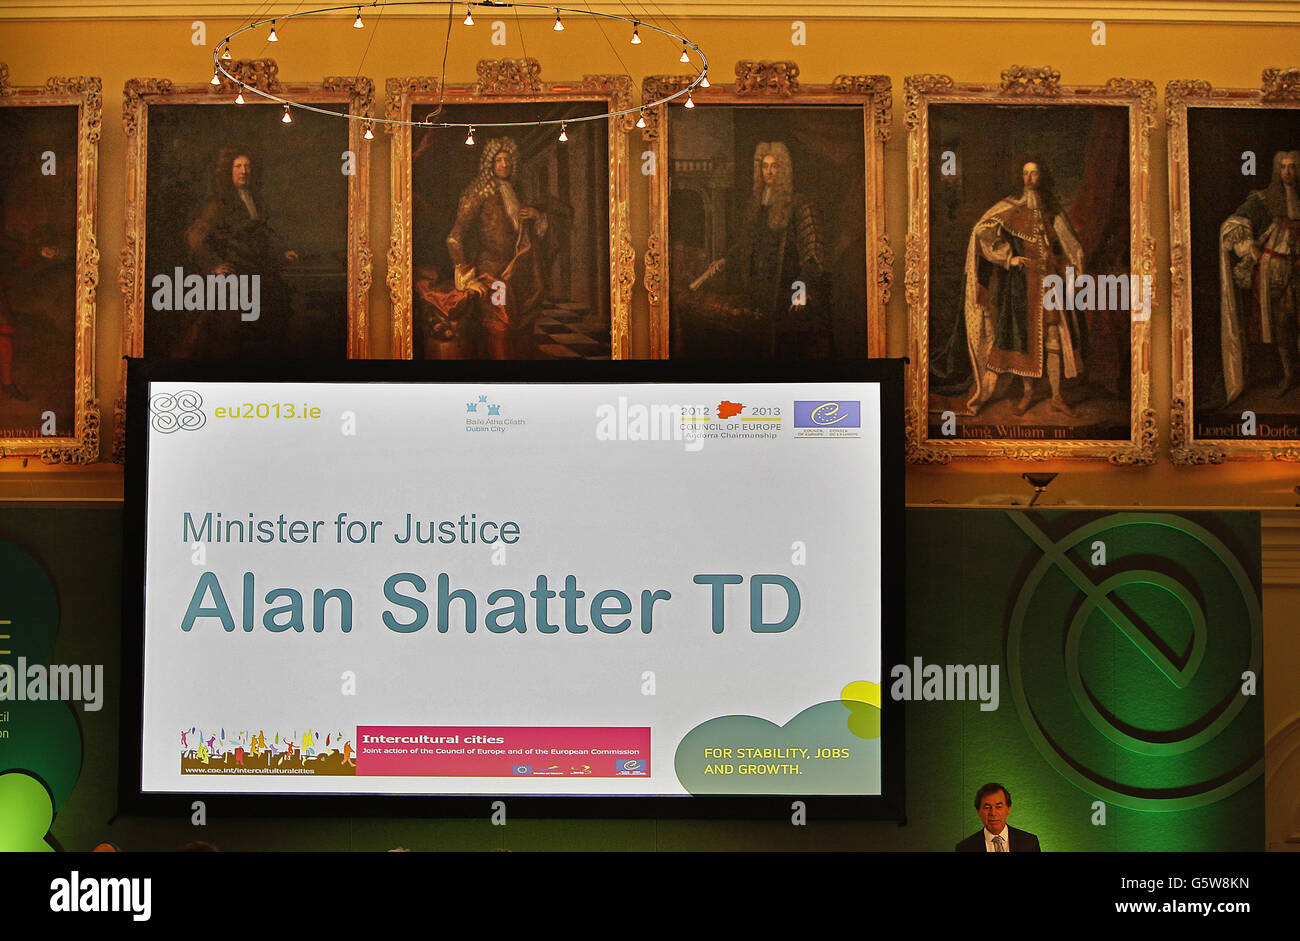 Minister for Justice Alan Shatter TD at the Dublin City Council hosted 'Making Diversity Work' conference, a joint Council of Europe and European Commission Intercultural Cities initiative at the Royal Hospital Kilmainham, Dublin. Stock Photo